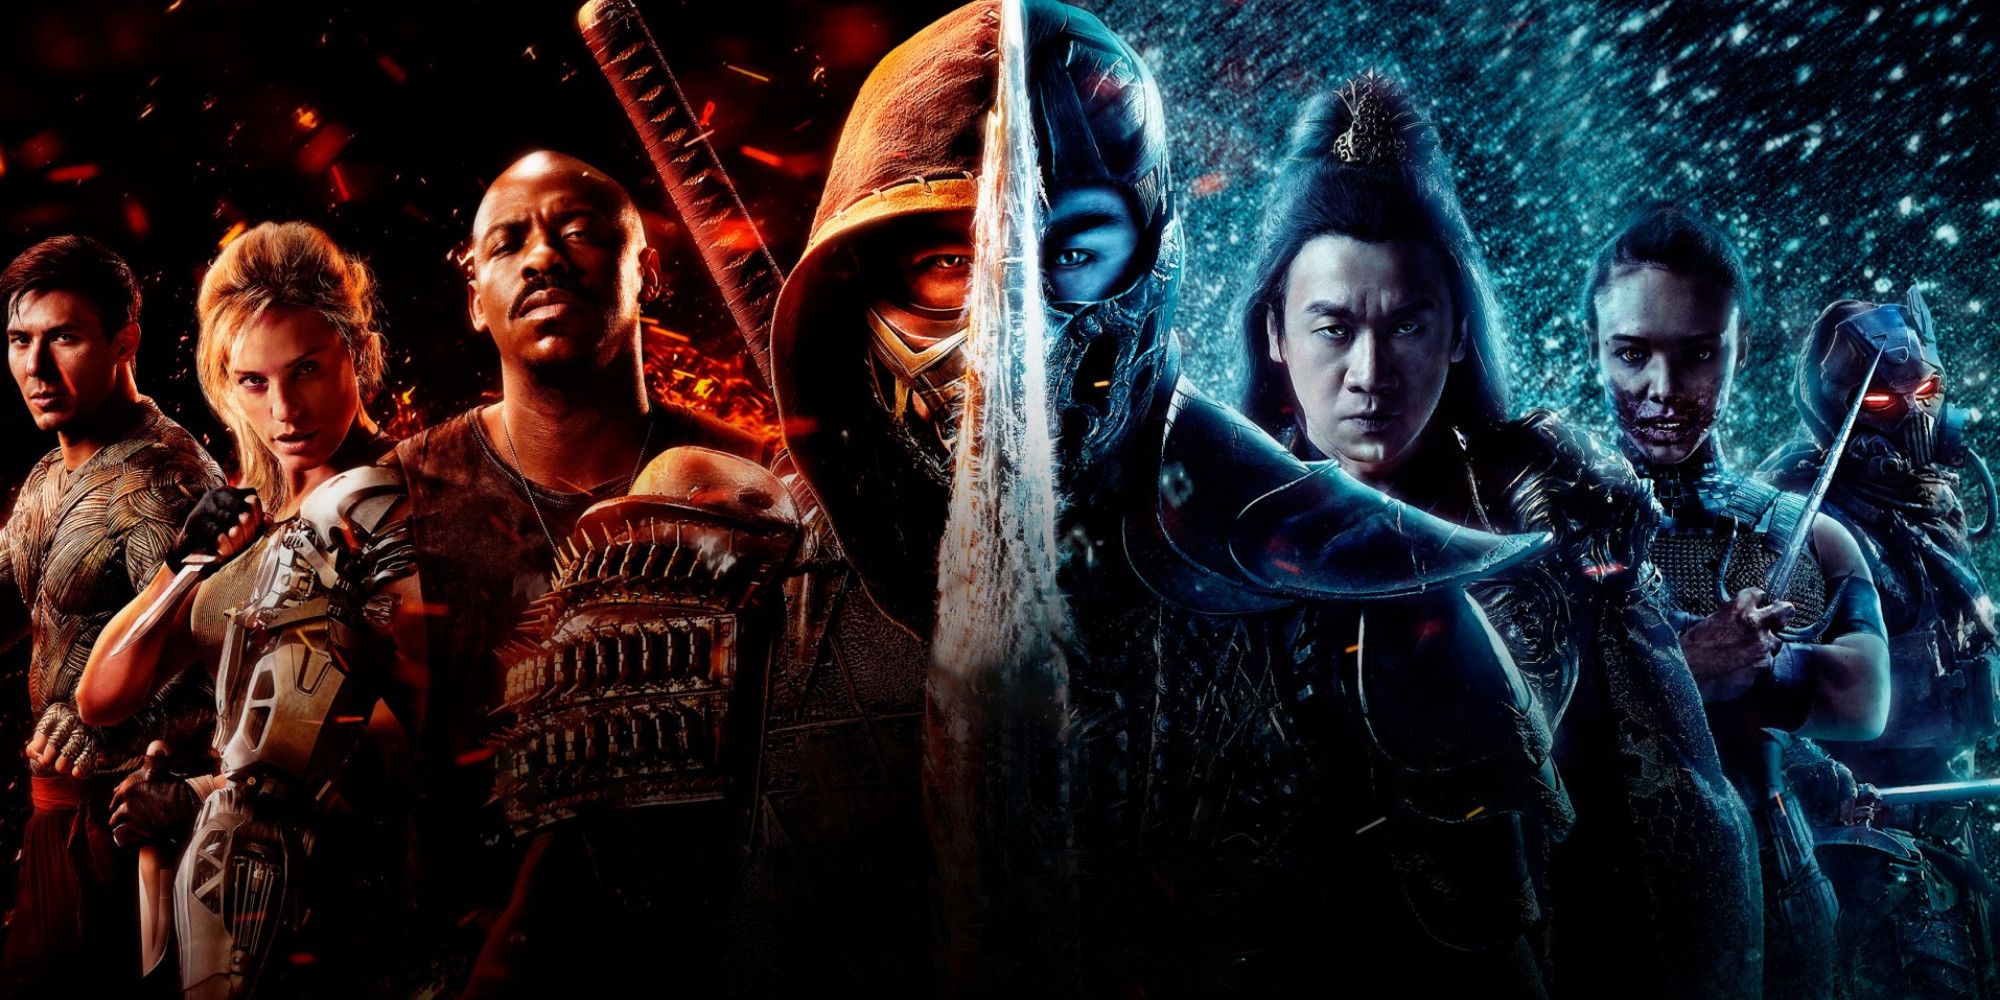 The cast of 2021's Mortal Kombat come together for epic group shot